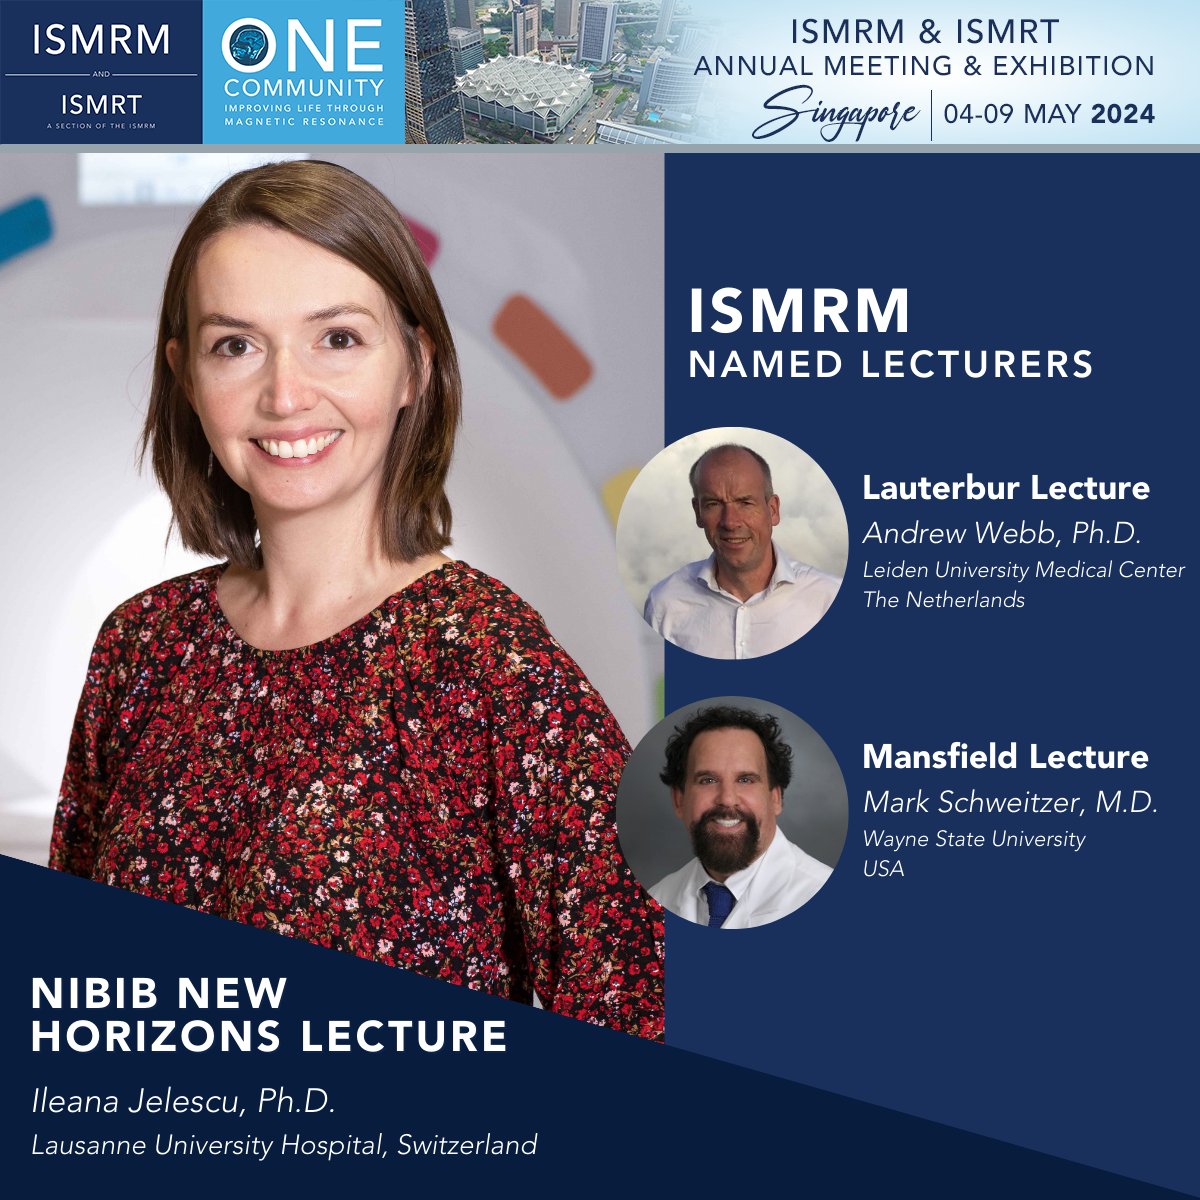 Ileana Jelescu, Ph.D. will present the NIBIB New Horizons Lecture, “Random Walks Toward an In Vivo MR Microscope,” at the ISMRM & ISMRT Annual Meeting & Exhibition. Read about Jelescu and her vision for the future of MR: bit.ly/3uBusZr #ISMRM #ISMRT #MRI #MR #Singapore